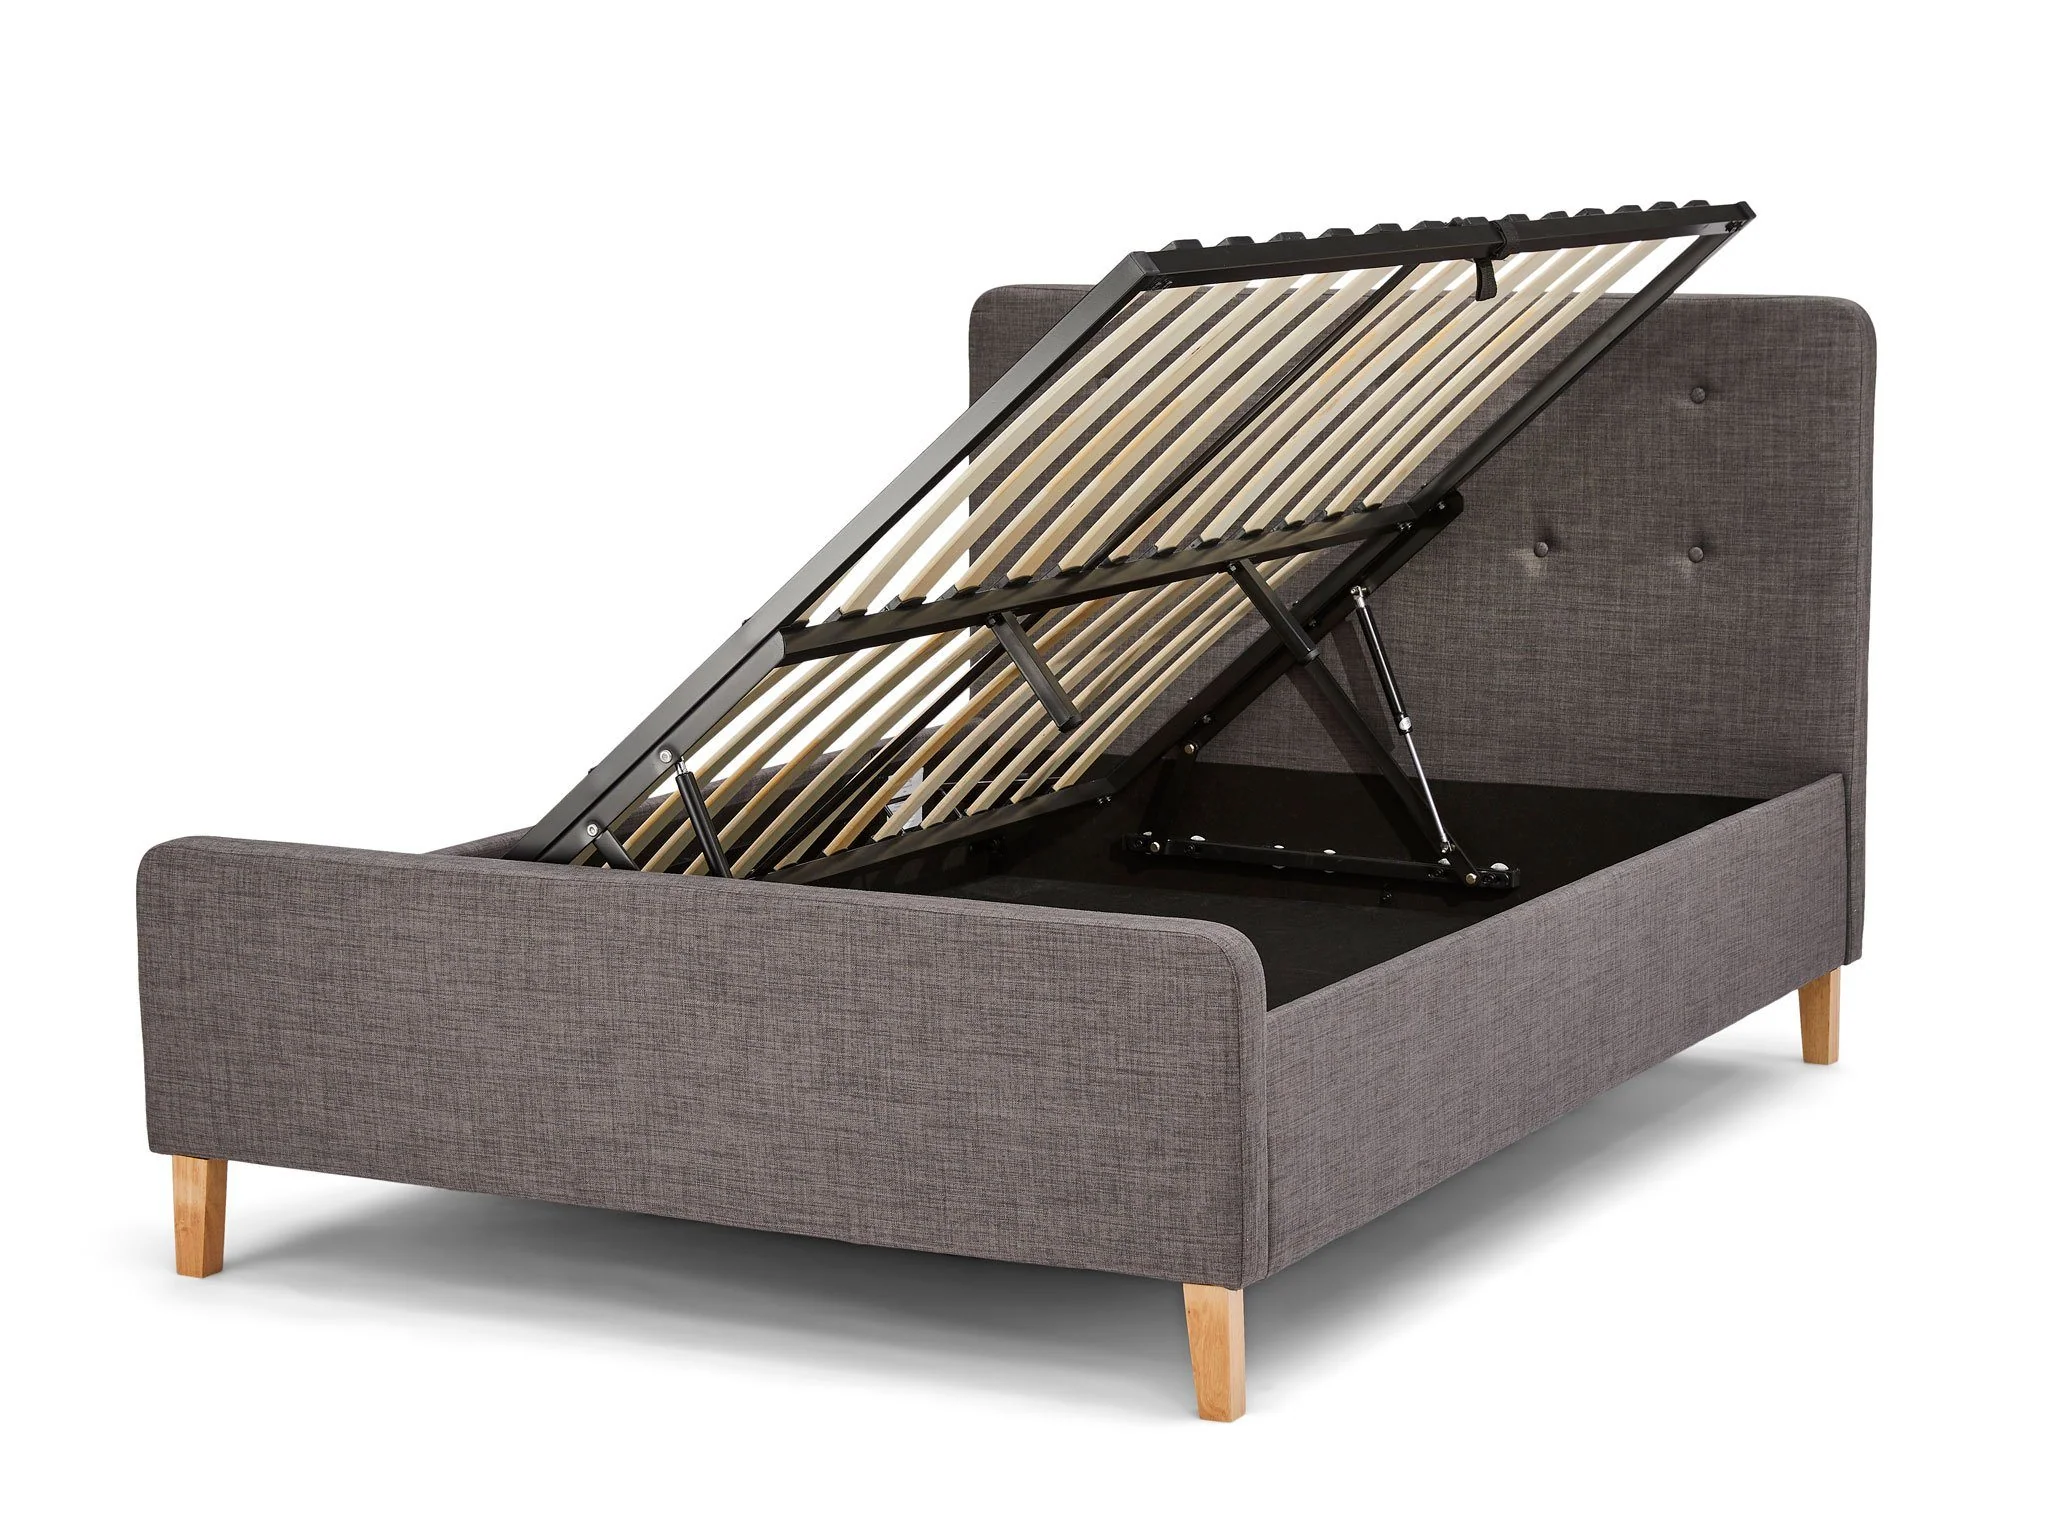 What Is the Cost of An Ottoman Bed?